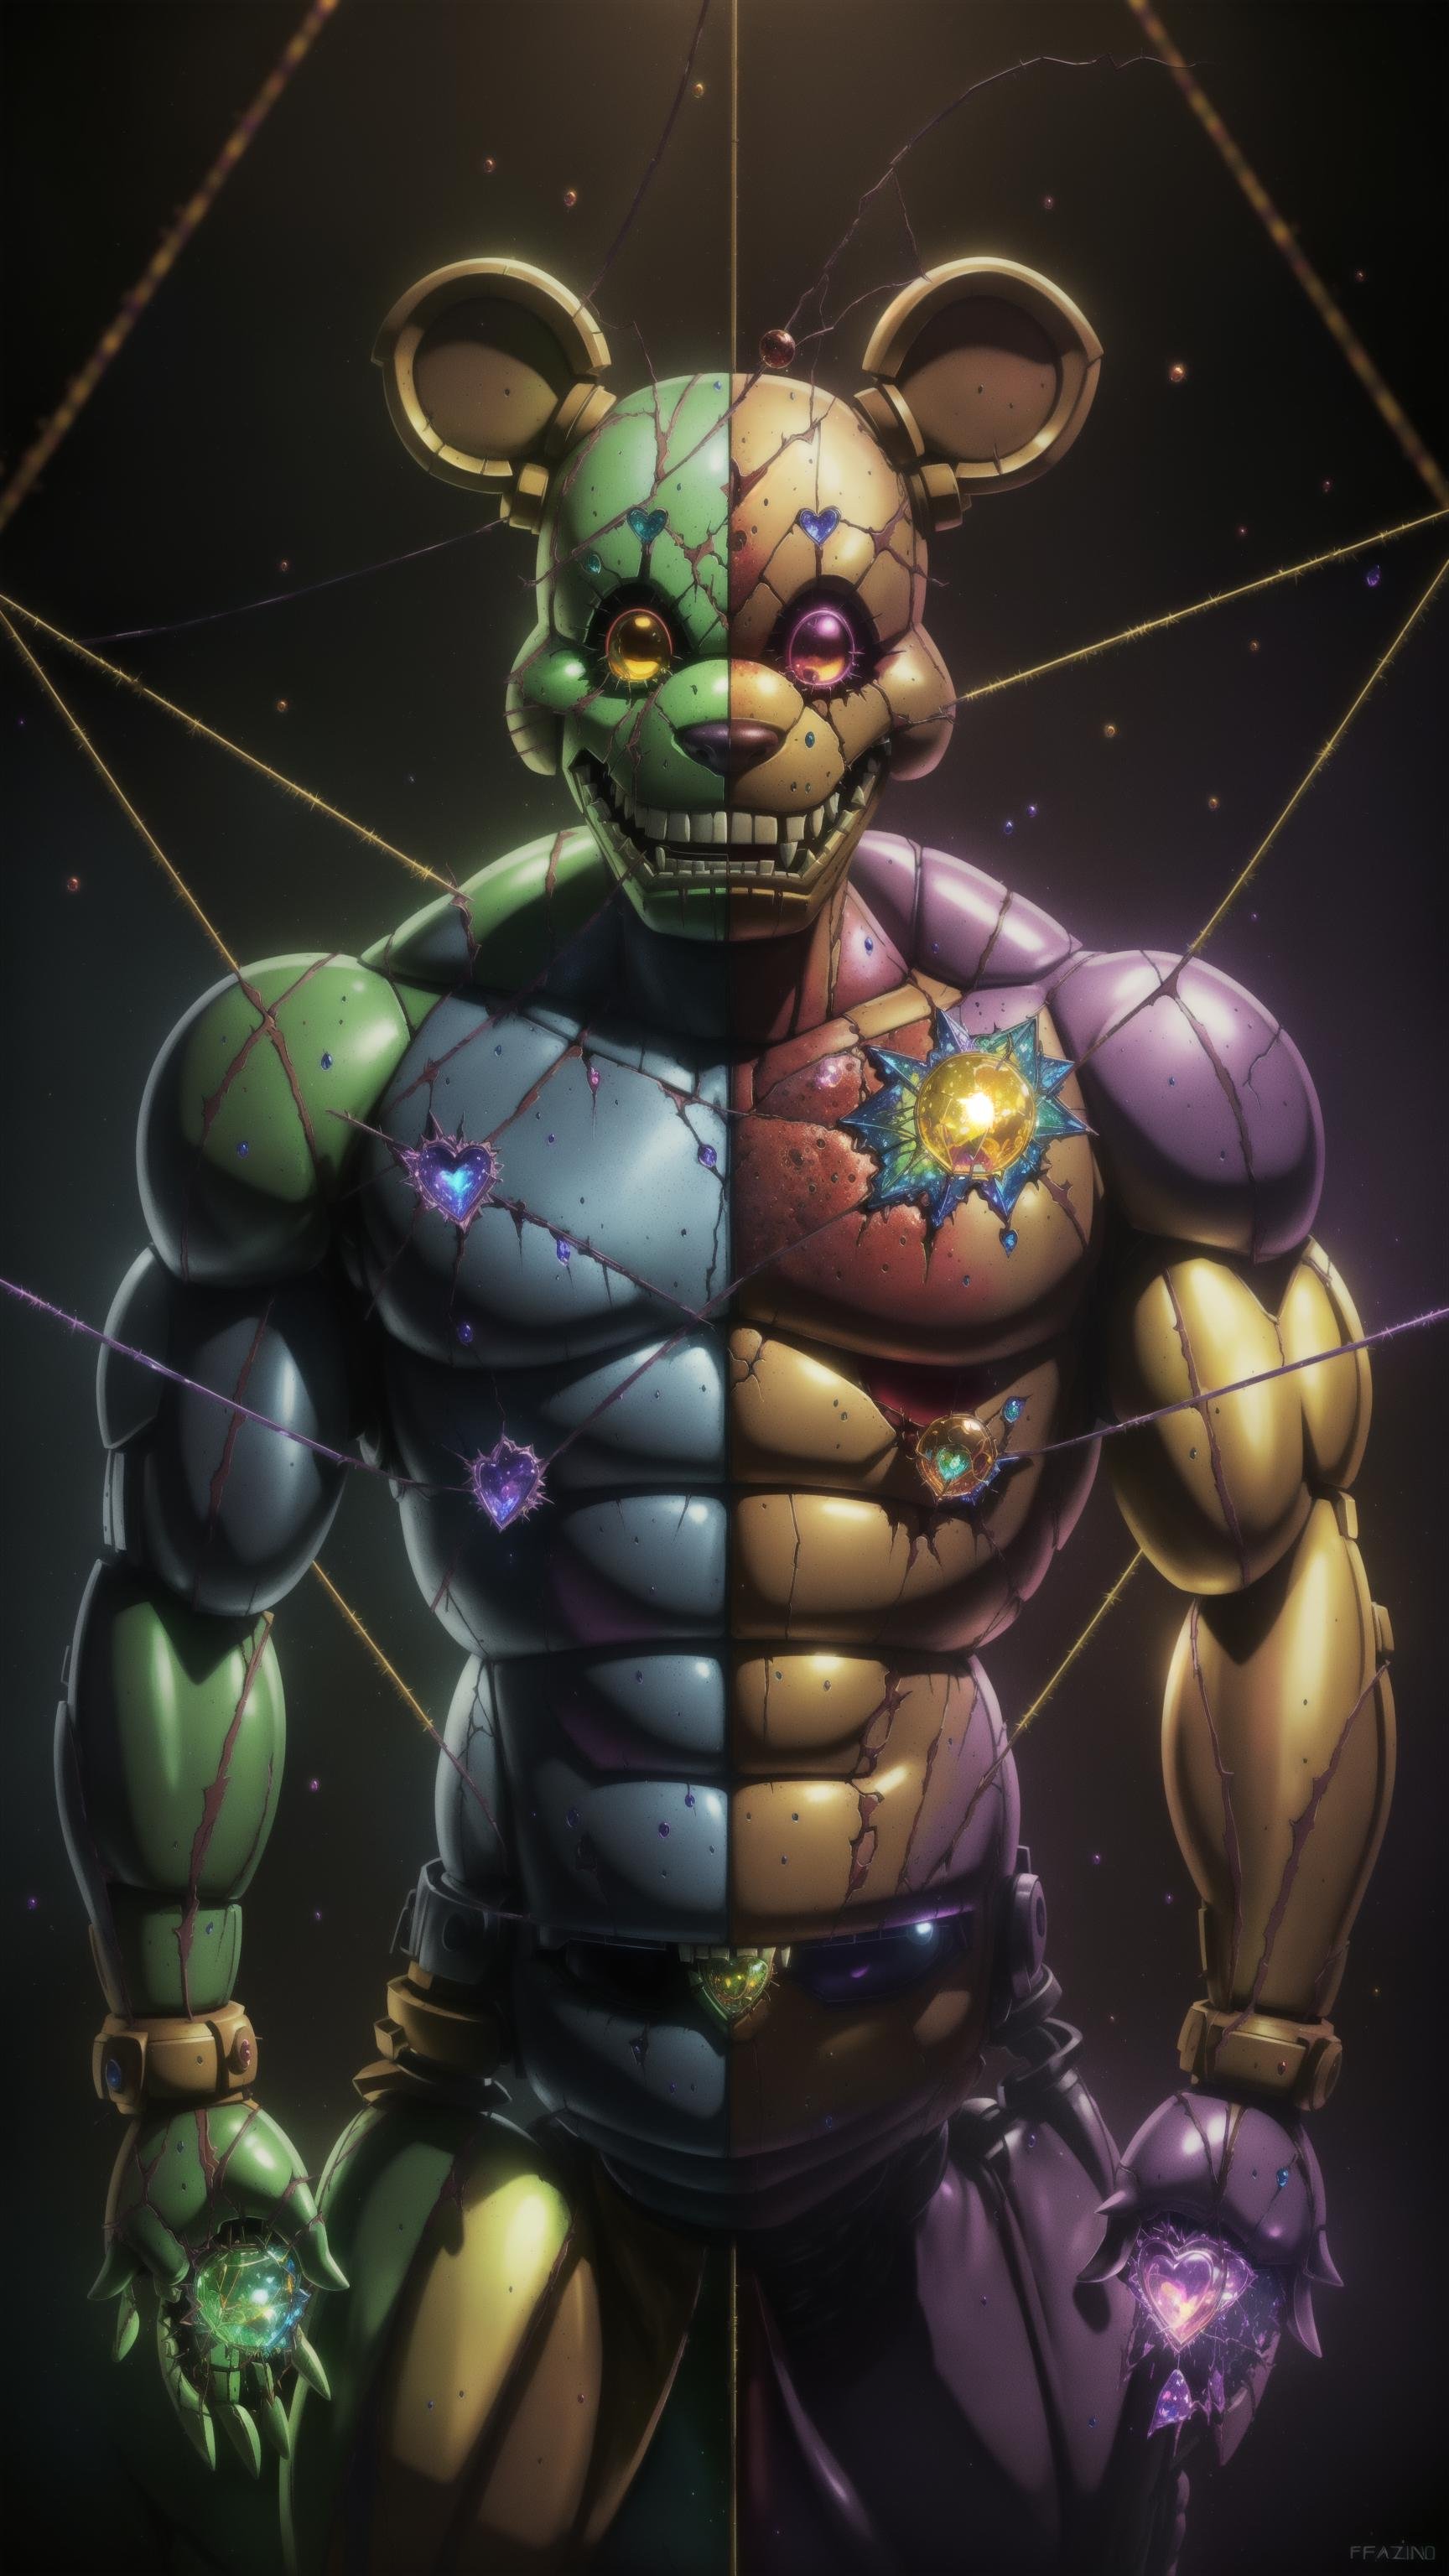 bonnie fnaf, rainbow springtrap, muscular animatronic, inside home, Springtrap, Nightmare Springtrap, realistic springtrap, fnaf springtrap, creepy springtrap, realistic springtrap, (rainbow bloody veins growing and intertwining out of the darkness), Springtrap potrait, oozing thick blue blood, sharp neon, veins growing and pumping blood, vascular networks growing, springtrap costume, green veins everywhere, (nailed wire), blood on body, (Muted colors:1.1), (Cross-hatching:1.1), (Infrared:1.2), Hypercube, ultra detailed, intricate, oil on canvas, ((dry brush, ultra sharp)), (surrealism:1.1), (disturbing:1.1), sparks, dark atmosphere, RTX, post processing, fnaf pizzeria, rainbow skin, ultra detail, freddy fazbear, springtrap Five Nights at Freddy's, a lot of blood, fnaf animatronic, nightmare animatronic, golden freddy, detailed background, pizzeria background, beksinski style,  heart on chest, lubrified body, body reflections, bloody, (shattered glass:1.3), cosmic space background, ethereal atmosphere, dynamic pose, black hole in the background, stars, space, lensflare, rim lighting, backlighting, detailed hands, muscular hands